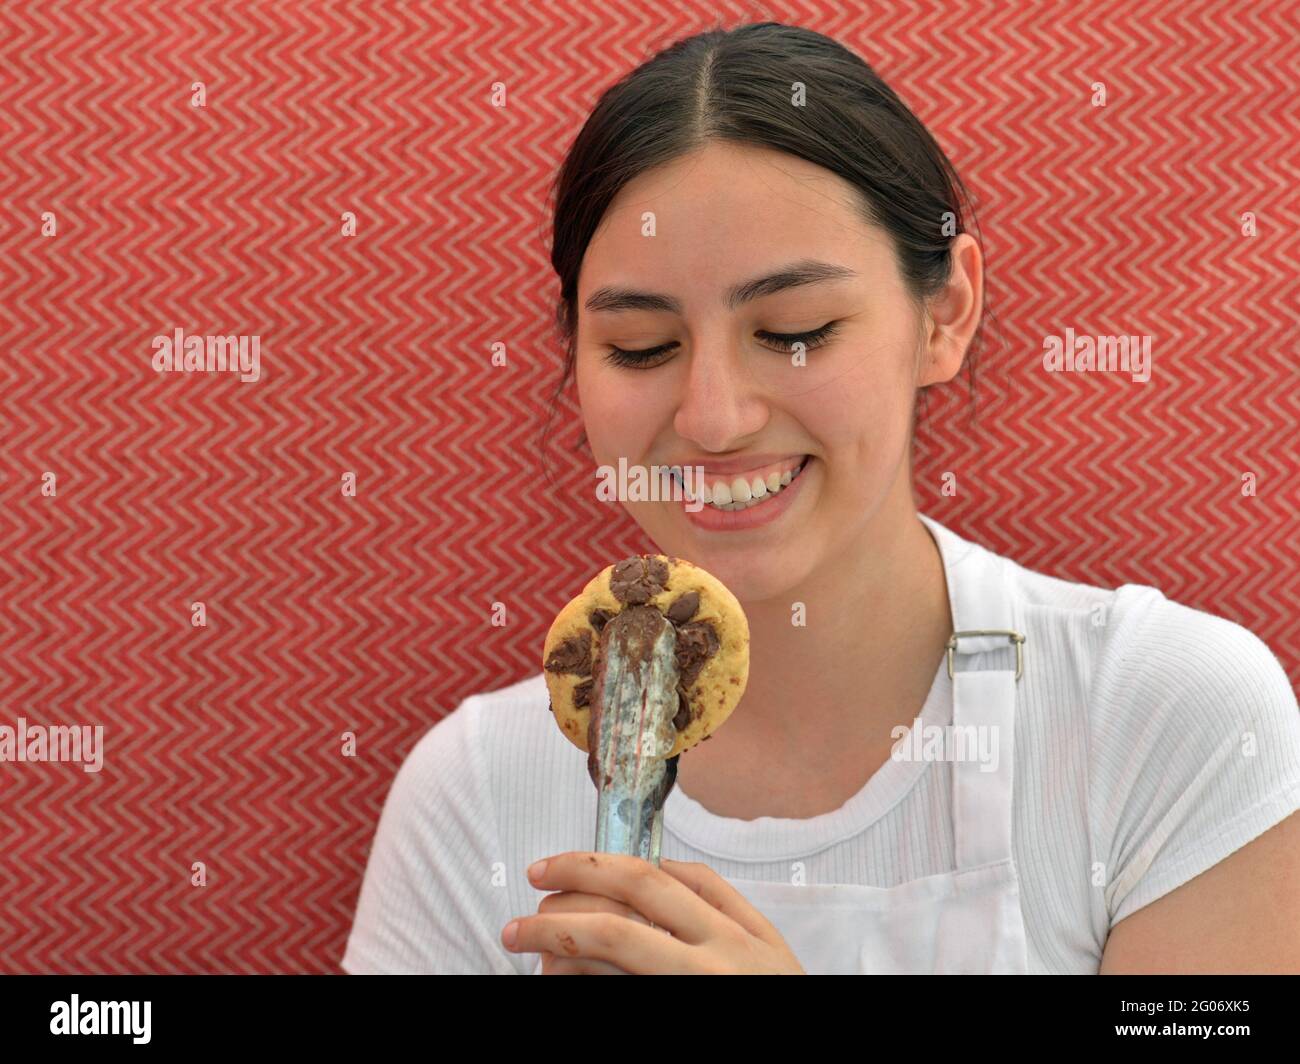 Young charming brunette salesgirl smiles and looks at a fresh home baked gourmet chocolate chip cookie in food tongs, in front of a red backdrop. Stock Photo